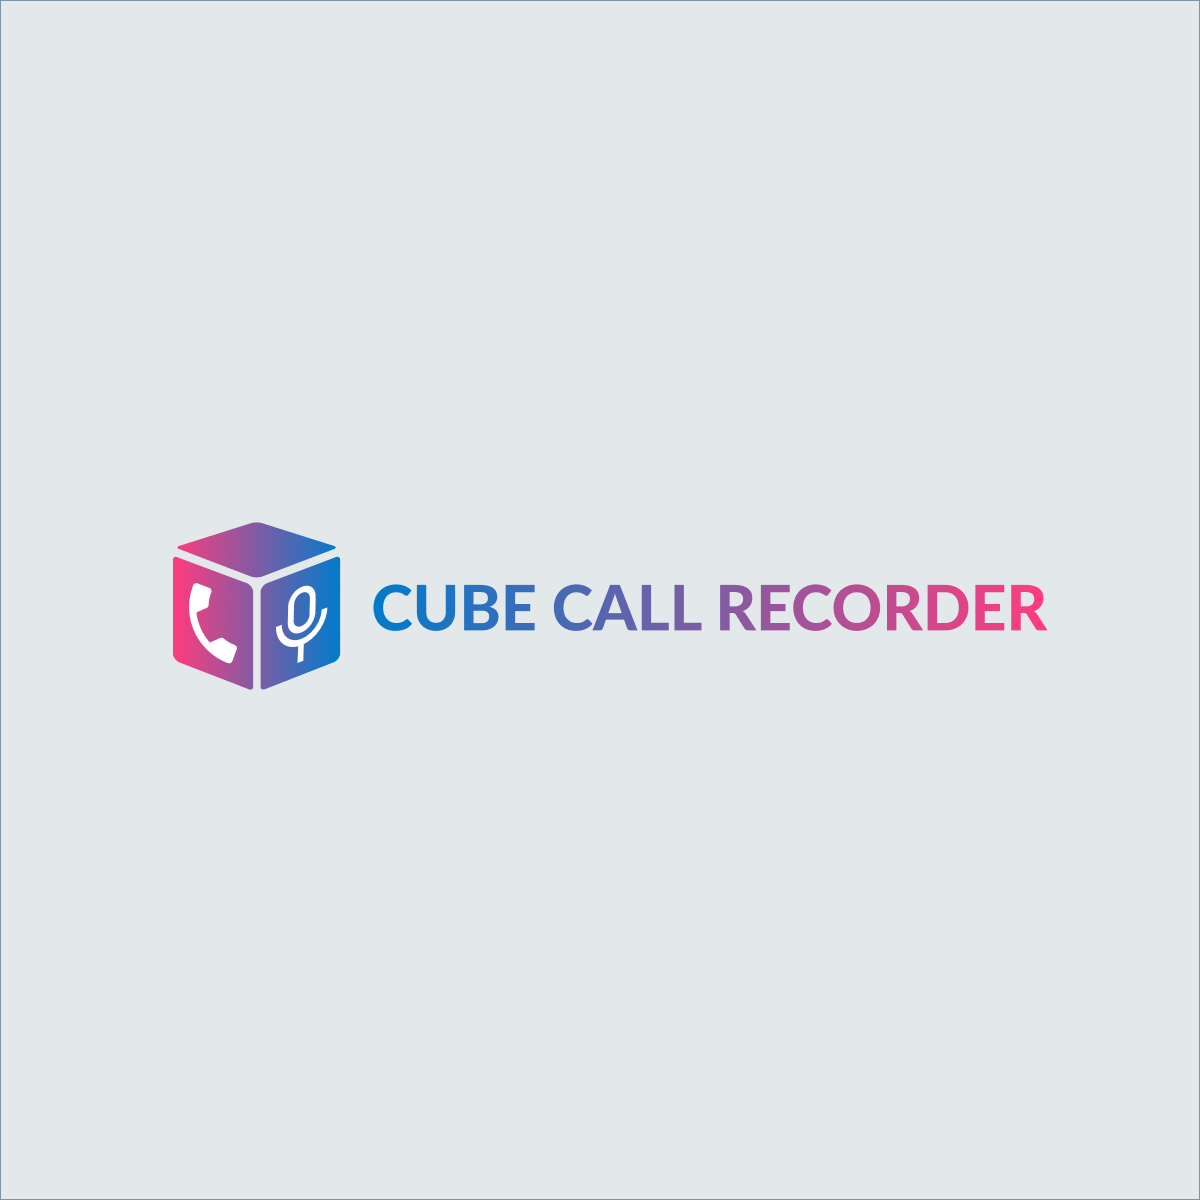 Take-up They are Resume Best Call Recorder App for Android | Cube Call Recorder ACR